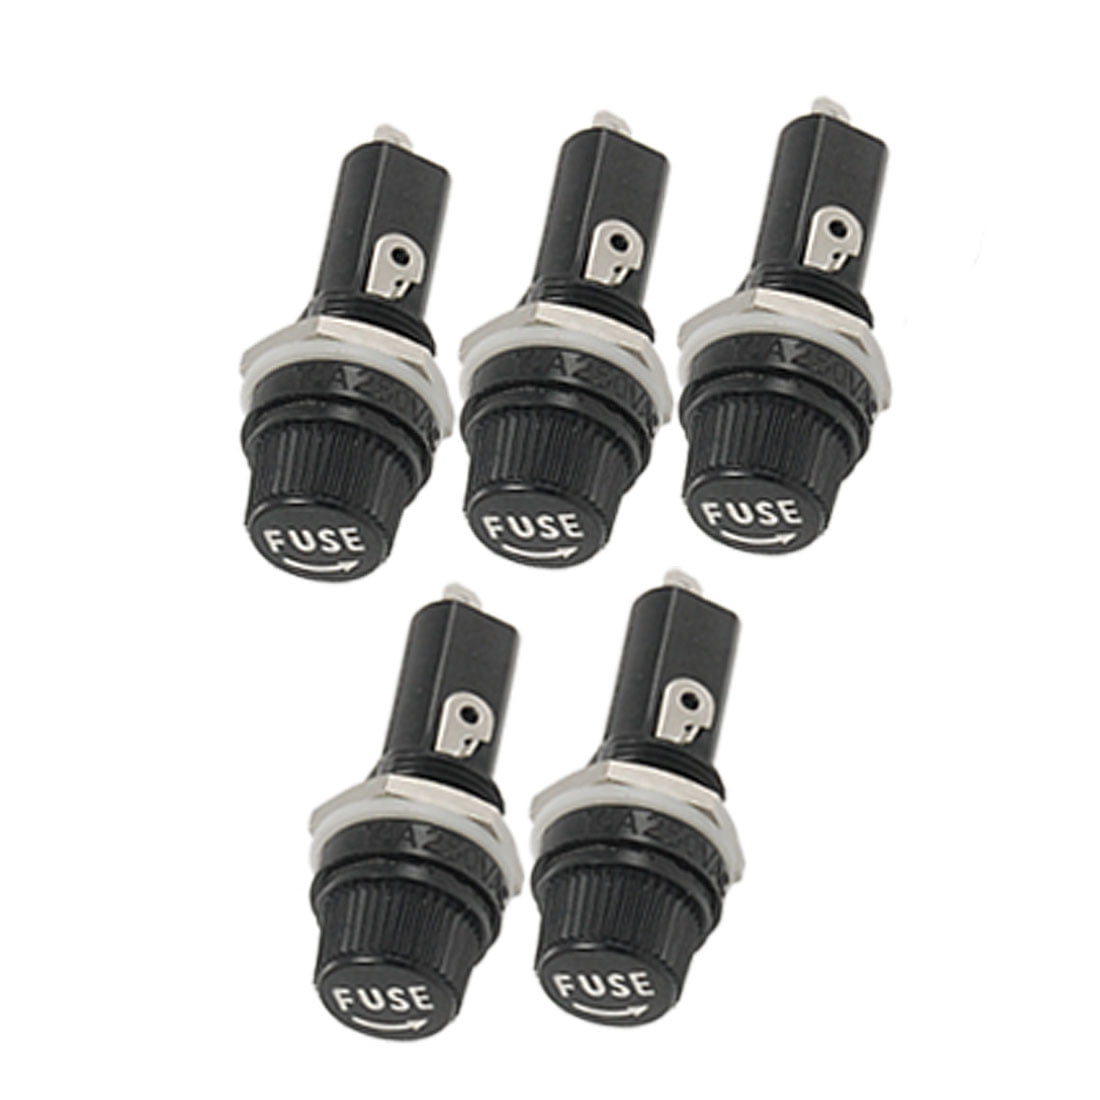 Dash Panel Mount Screw Cap Fuse Holder Case for Glass Tube Fuses 6x30mm 15A